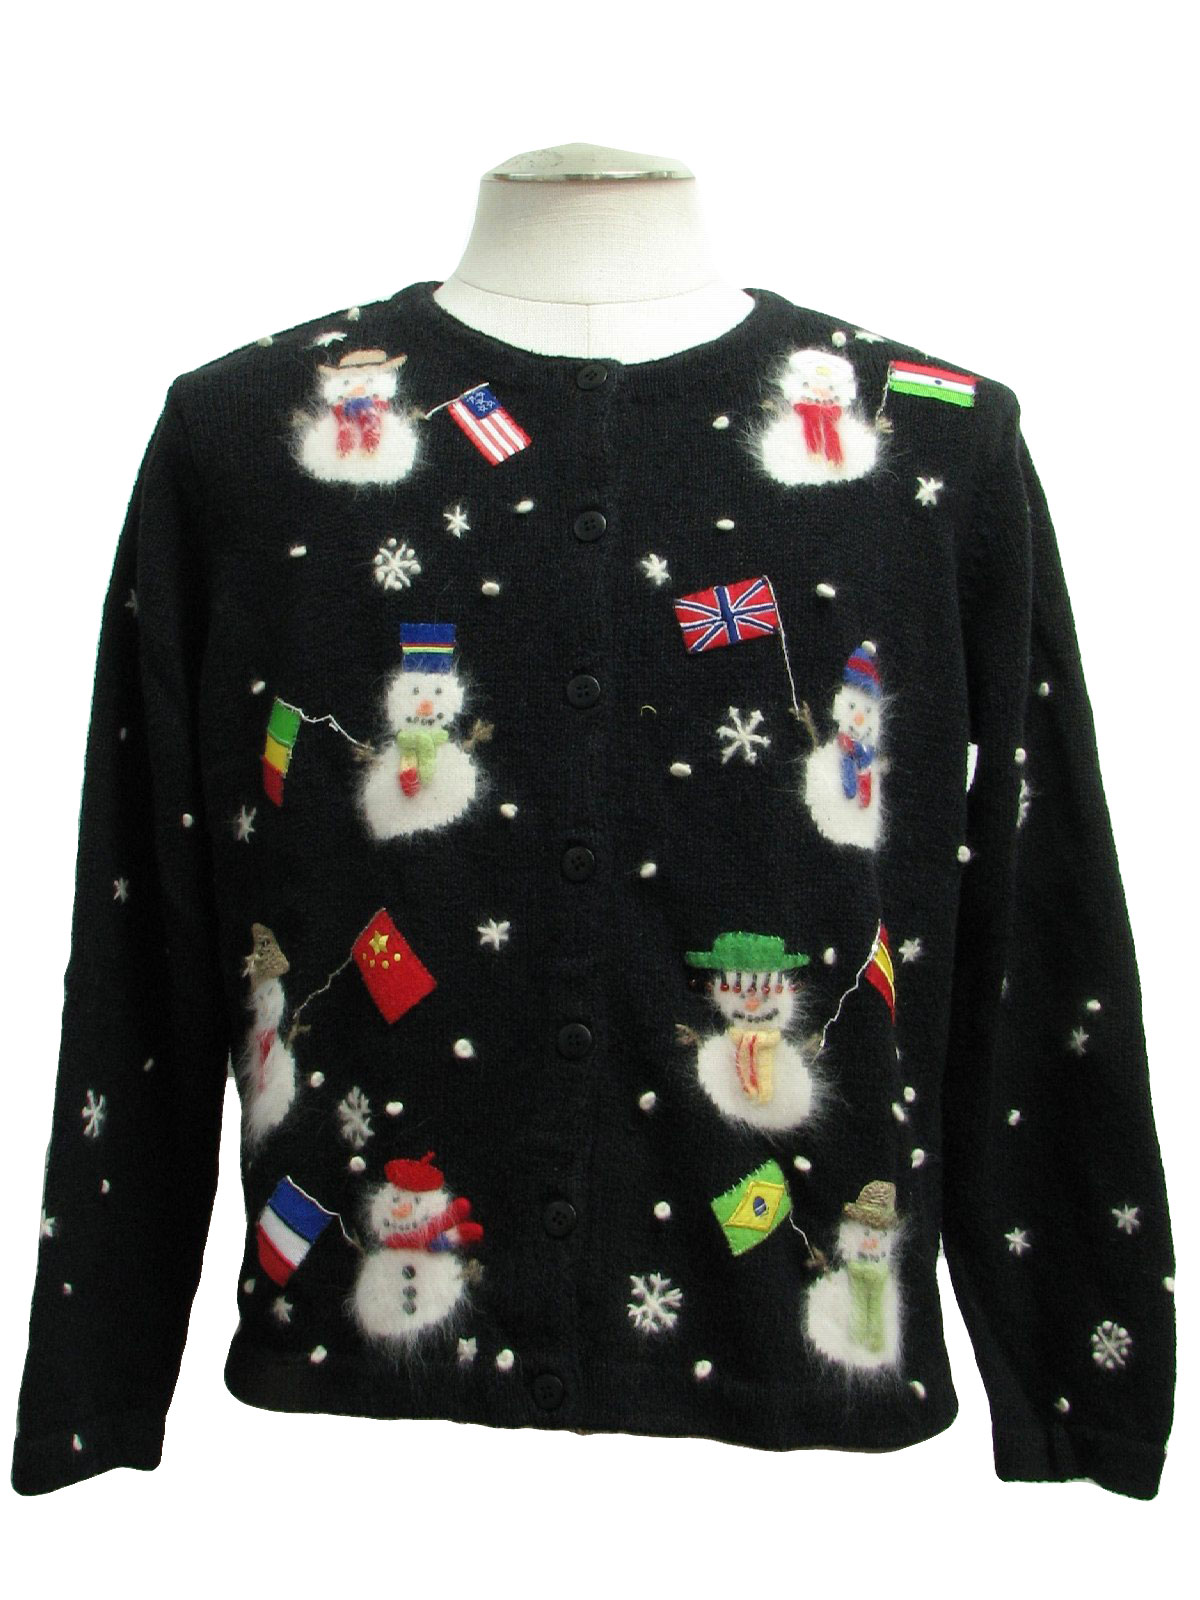 Womens Ugly Christmas Sweater: -Northern Isles- Womens black background ...